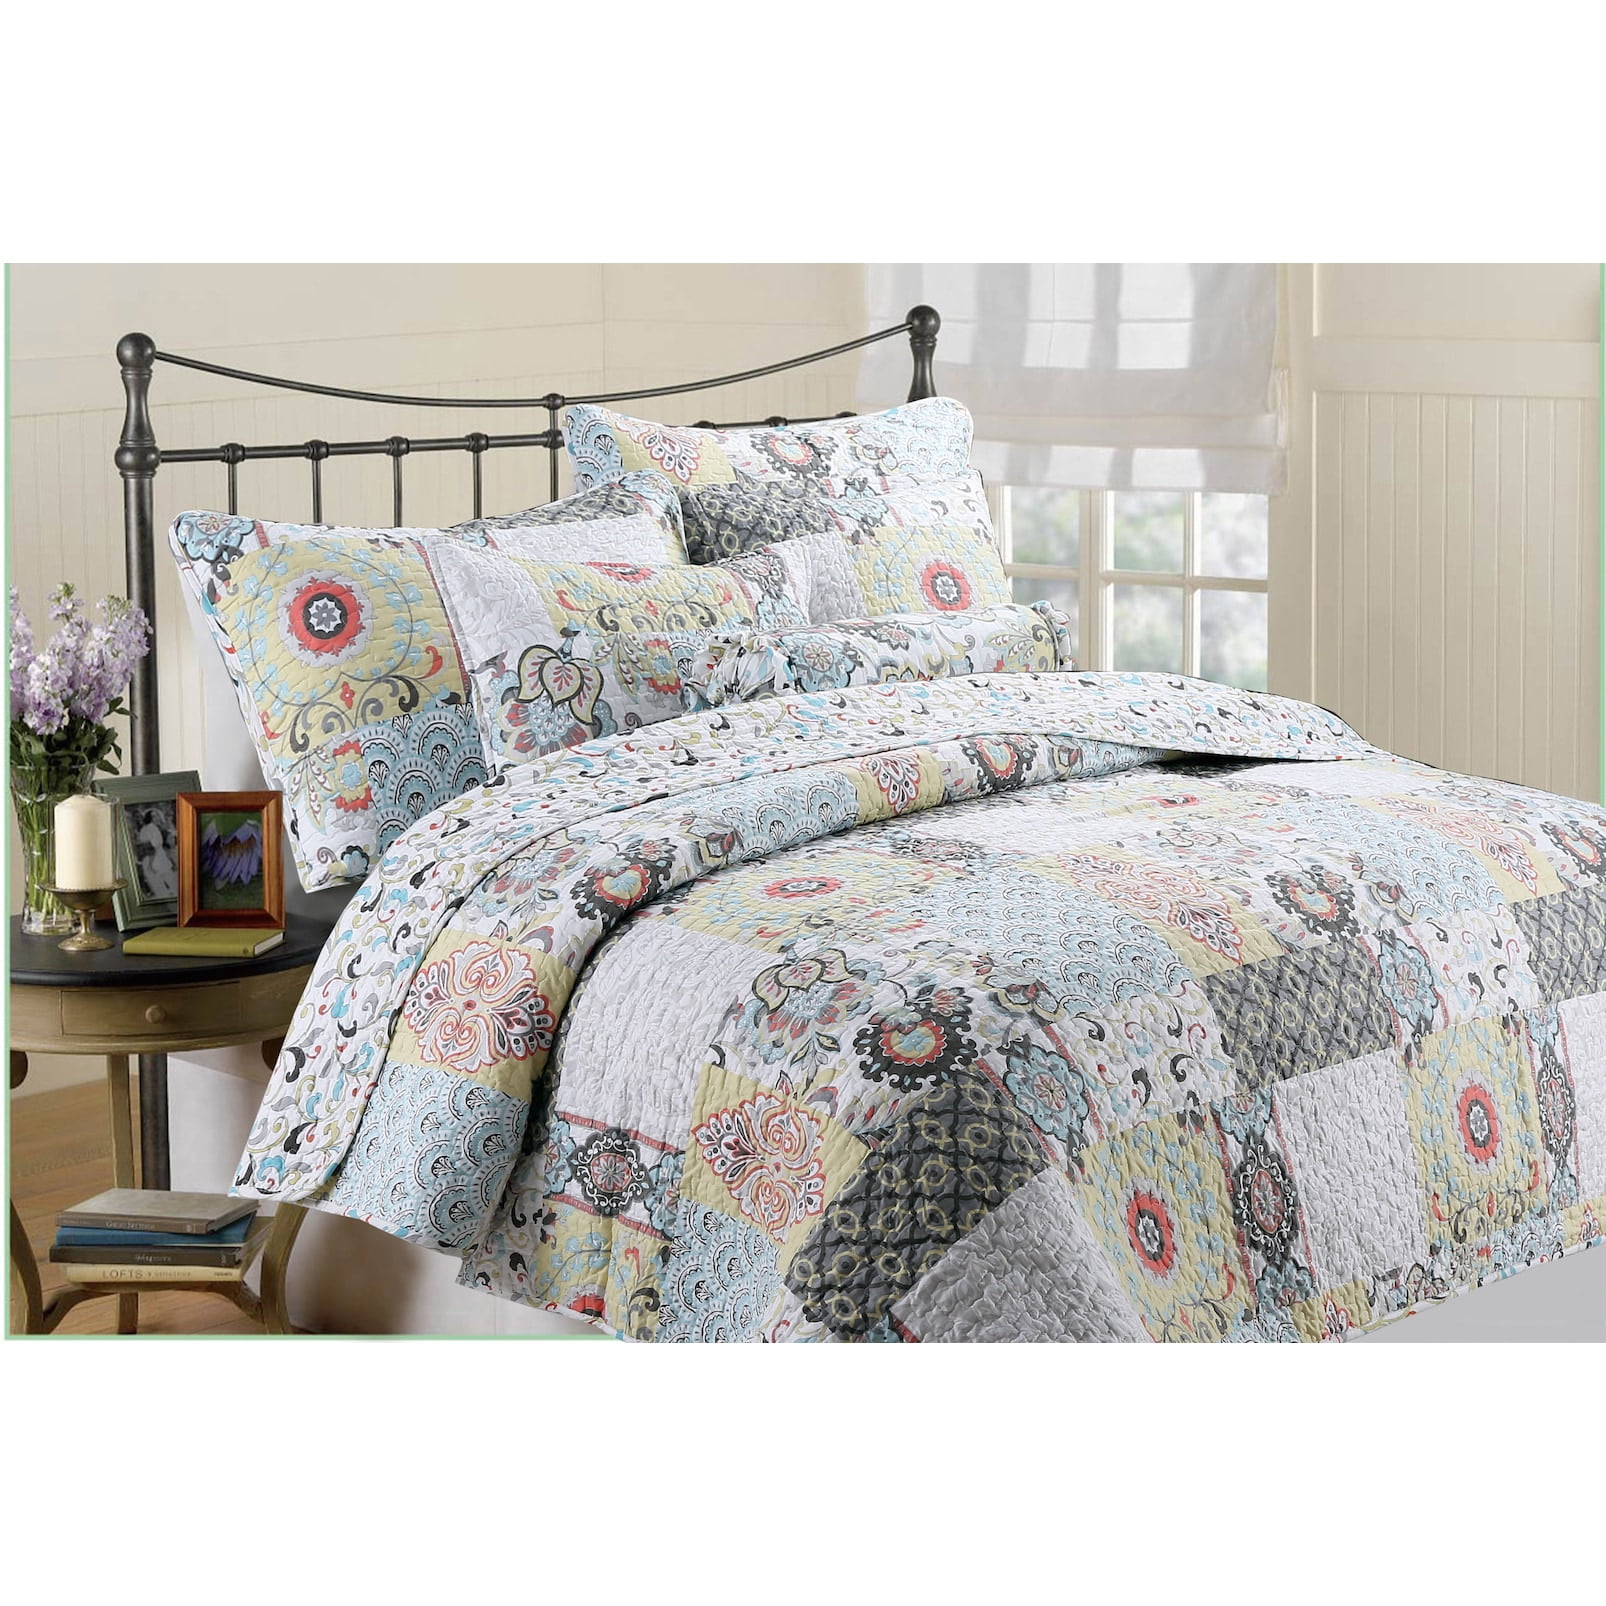 Details about   Home Quilt Cover Blanket Pure Cotton Handmade Patchwork Quilt Bed Cover Bedding 